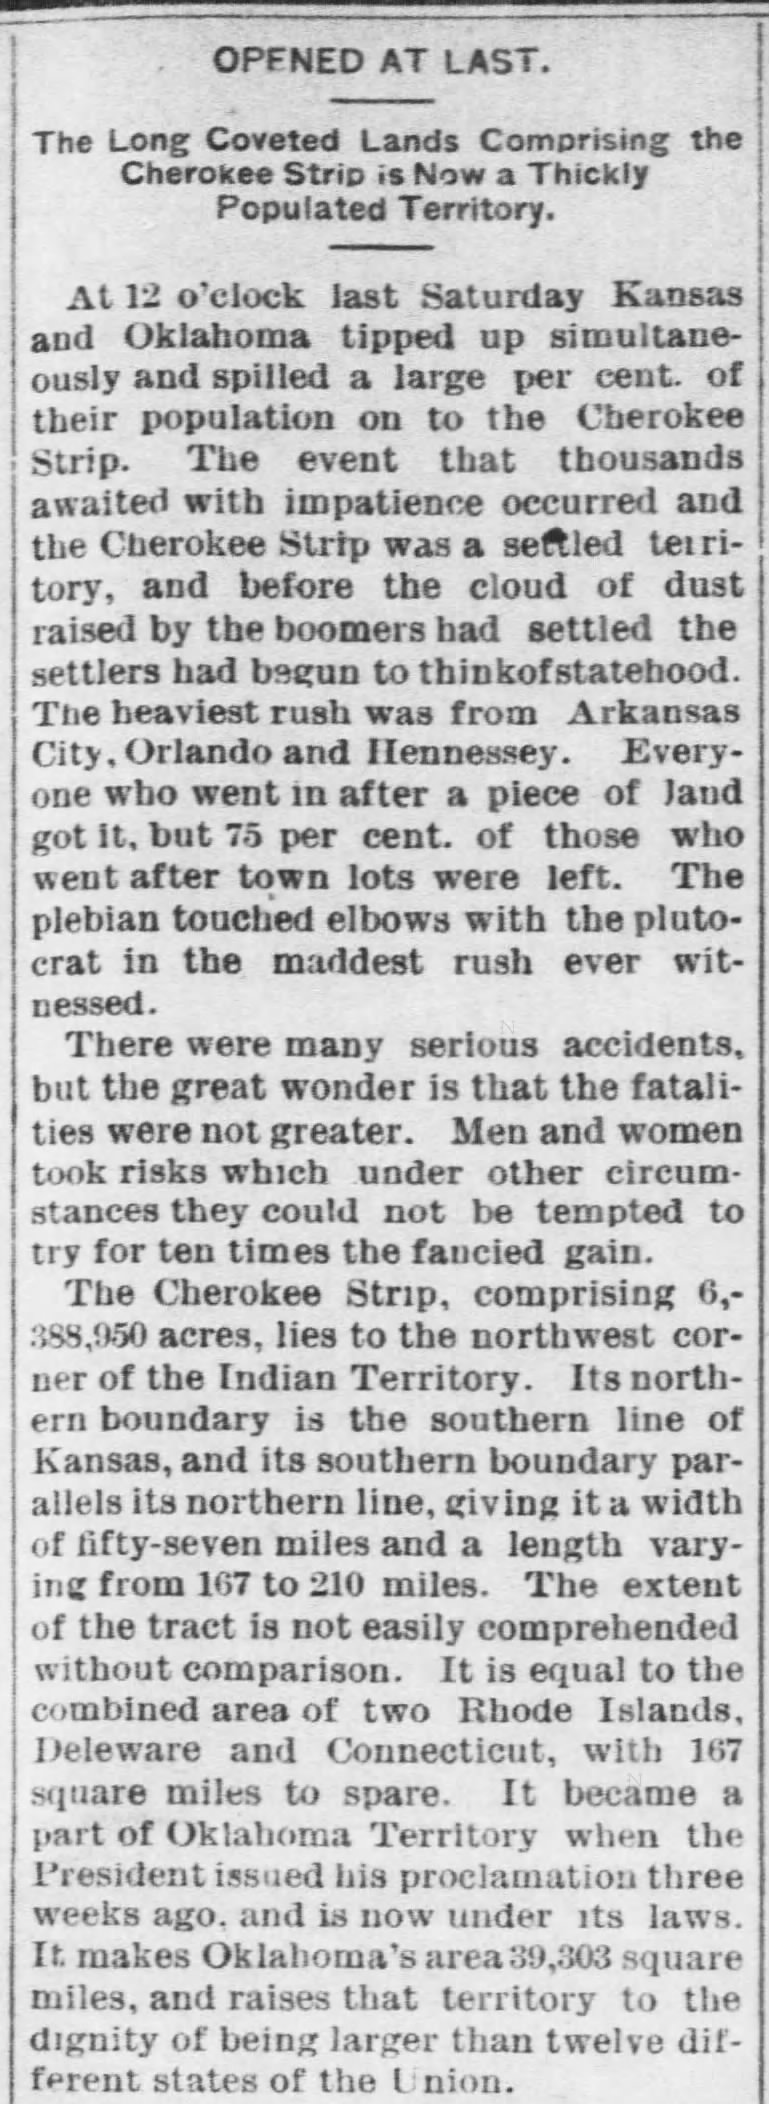 One week after the Cherokee Strip Land Run of Sep. 16, 1893